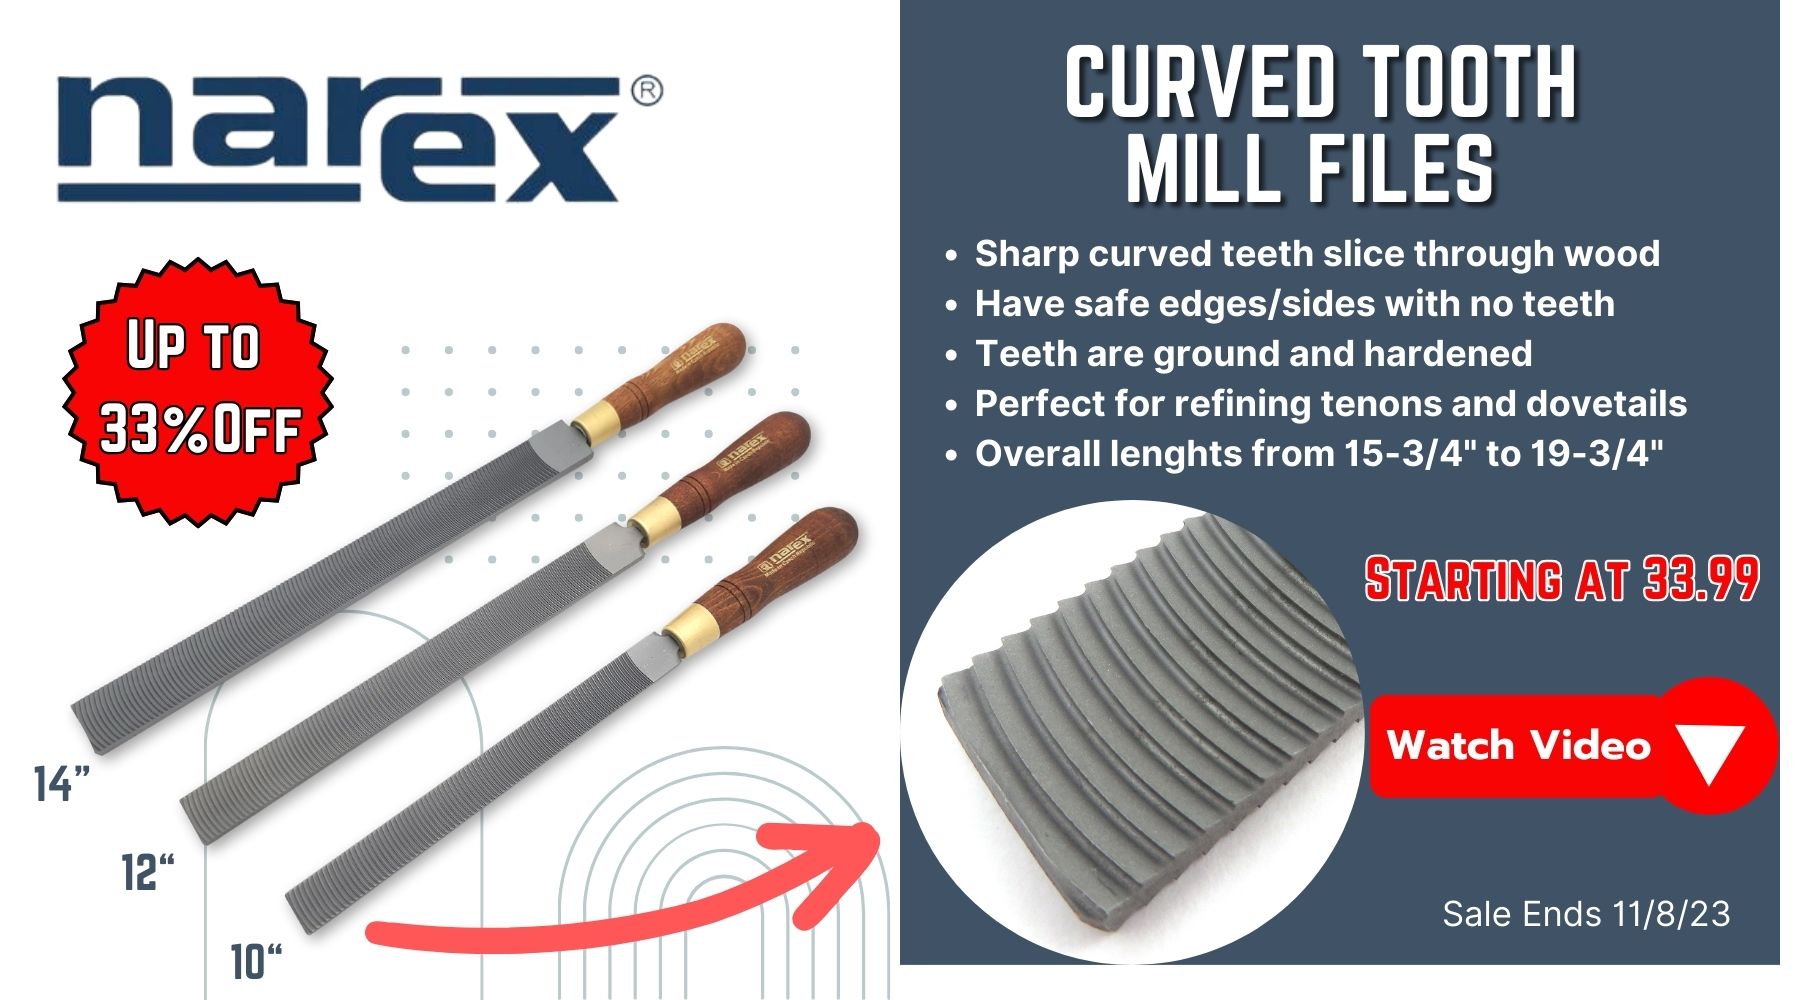 Narex Curved Tooth Mill Files